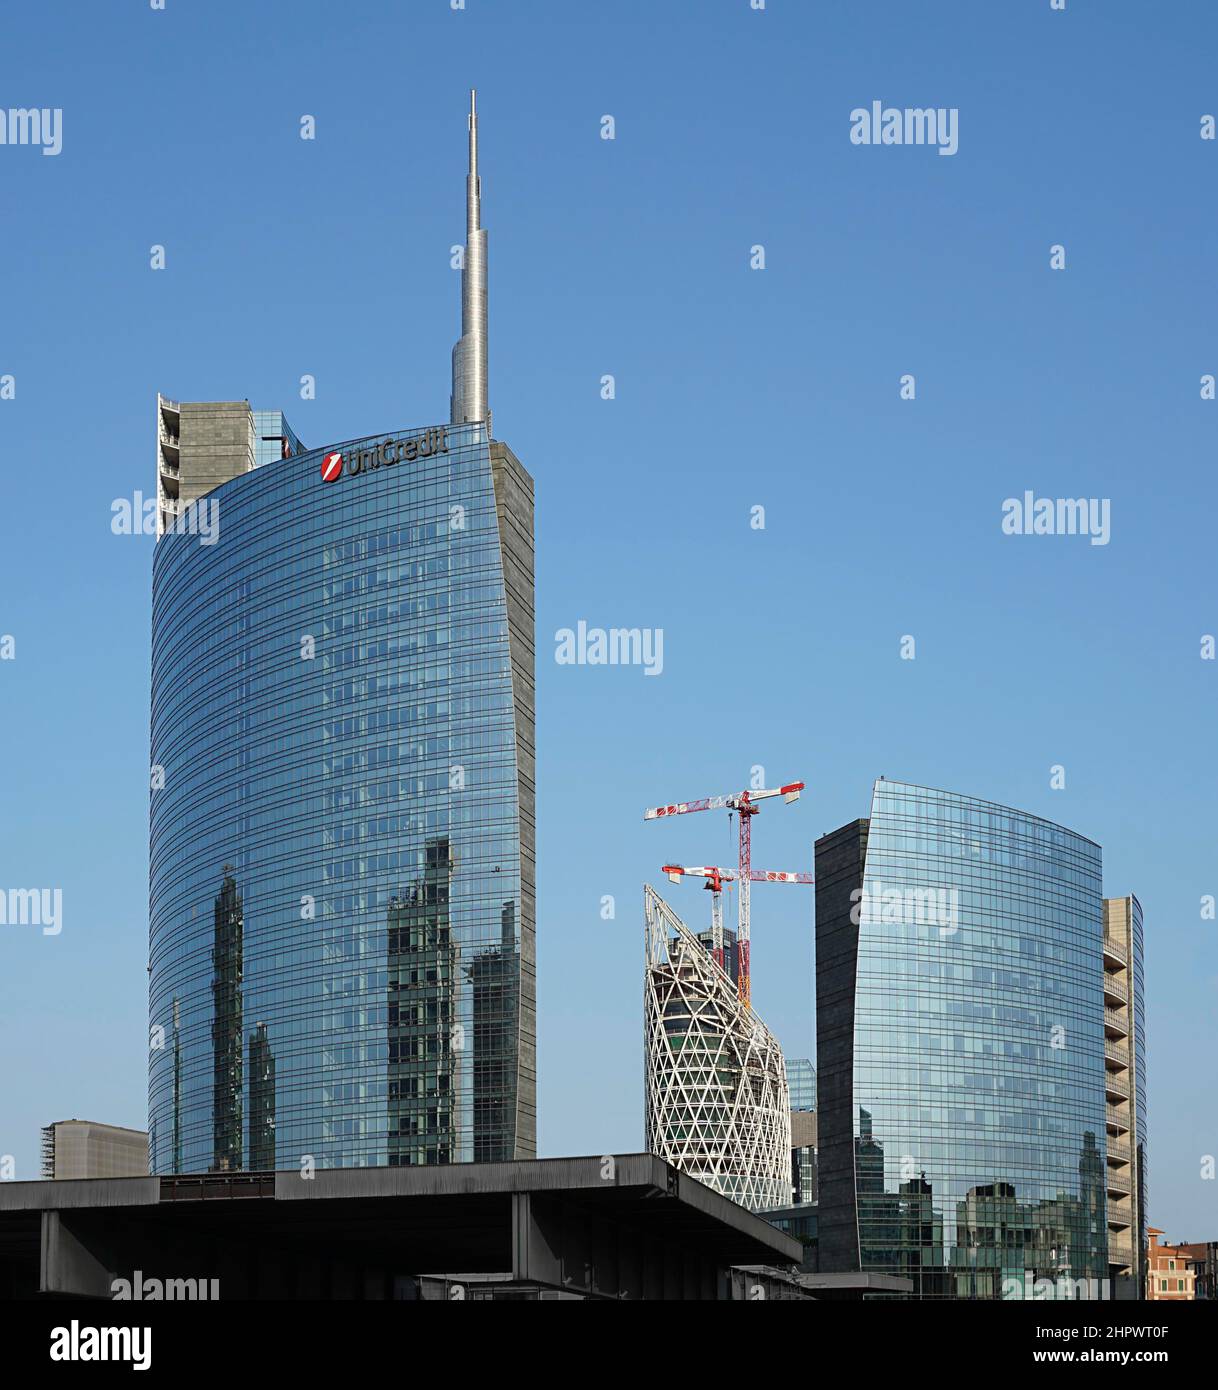 Torre Unicredit high-rise, Nido Verticale, Vertical Nest under construction, Porta Nuova, Milan, Lombardy, Italy Stock Photo